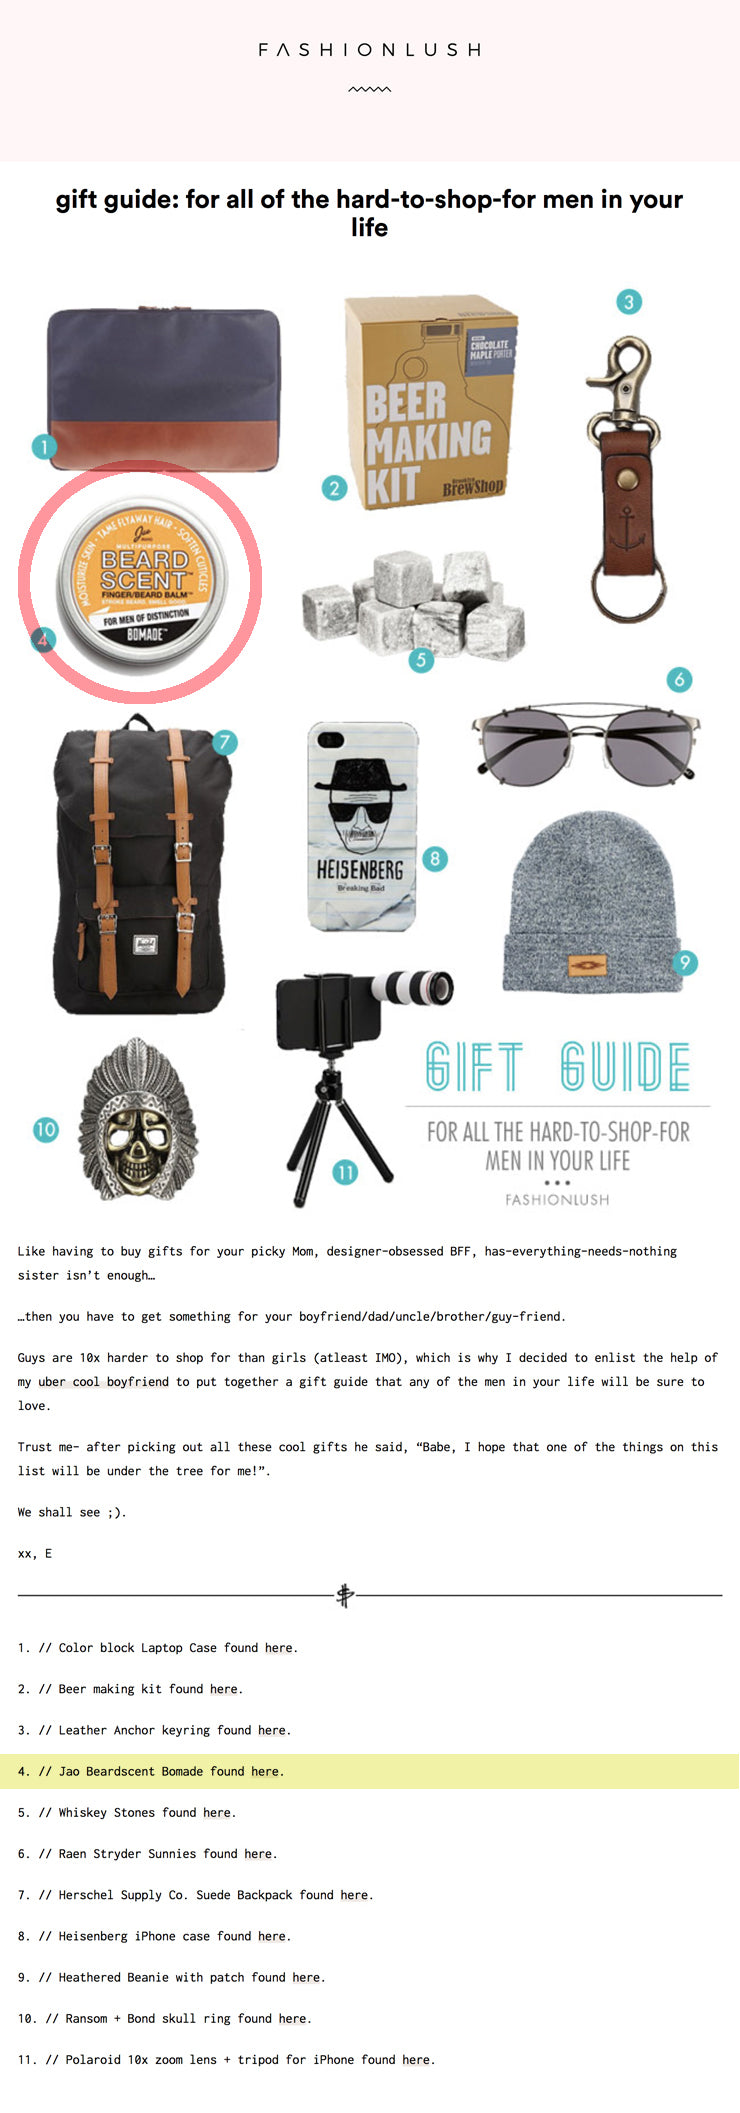 Fashion Lush Gift Guide BeardScent by Jao Brand